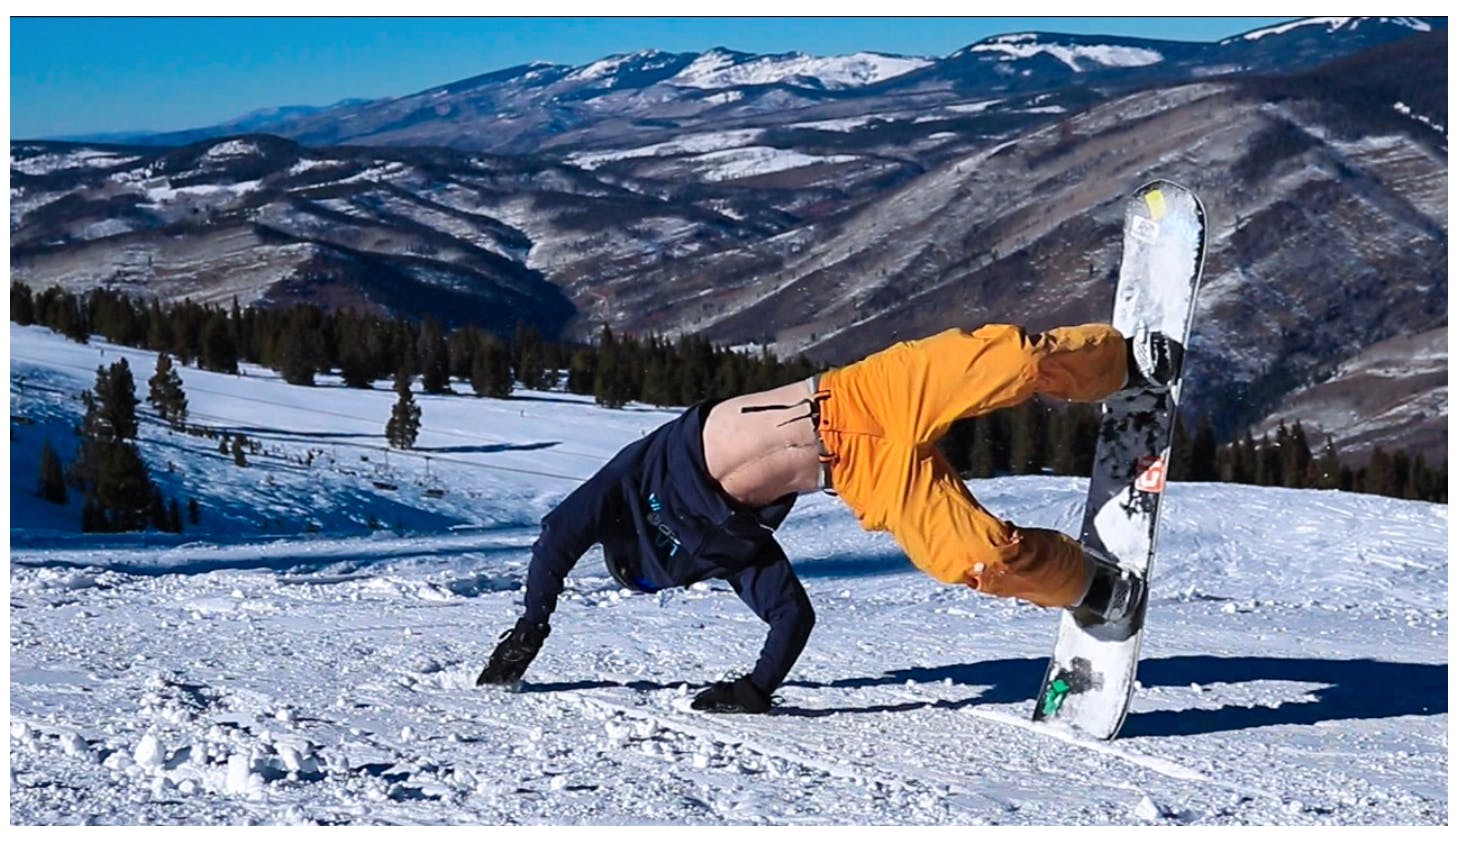 This Portable Snowboard Footrest Uses Hook & Wire To Attach To